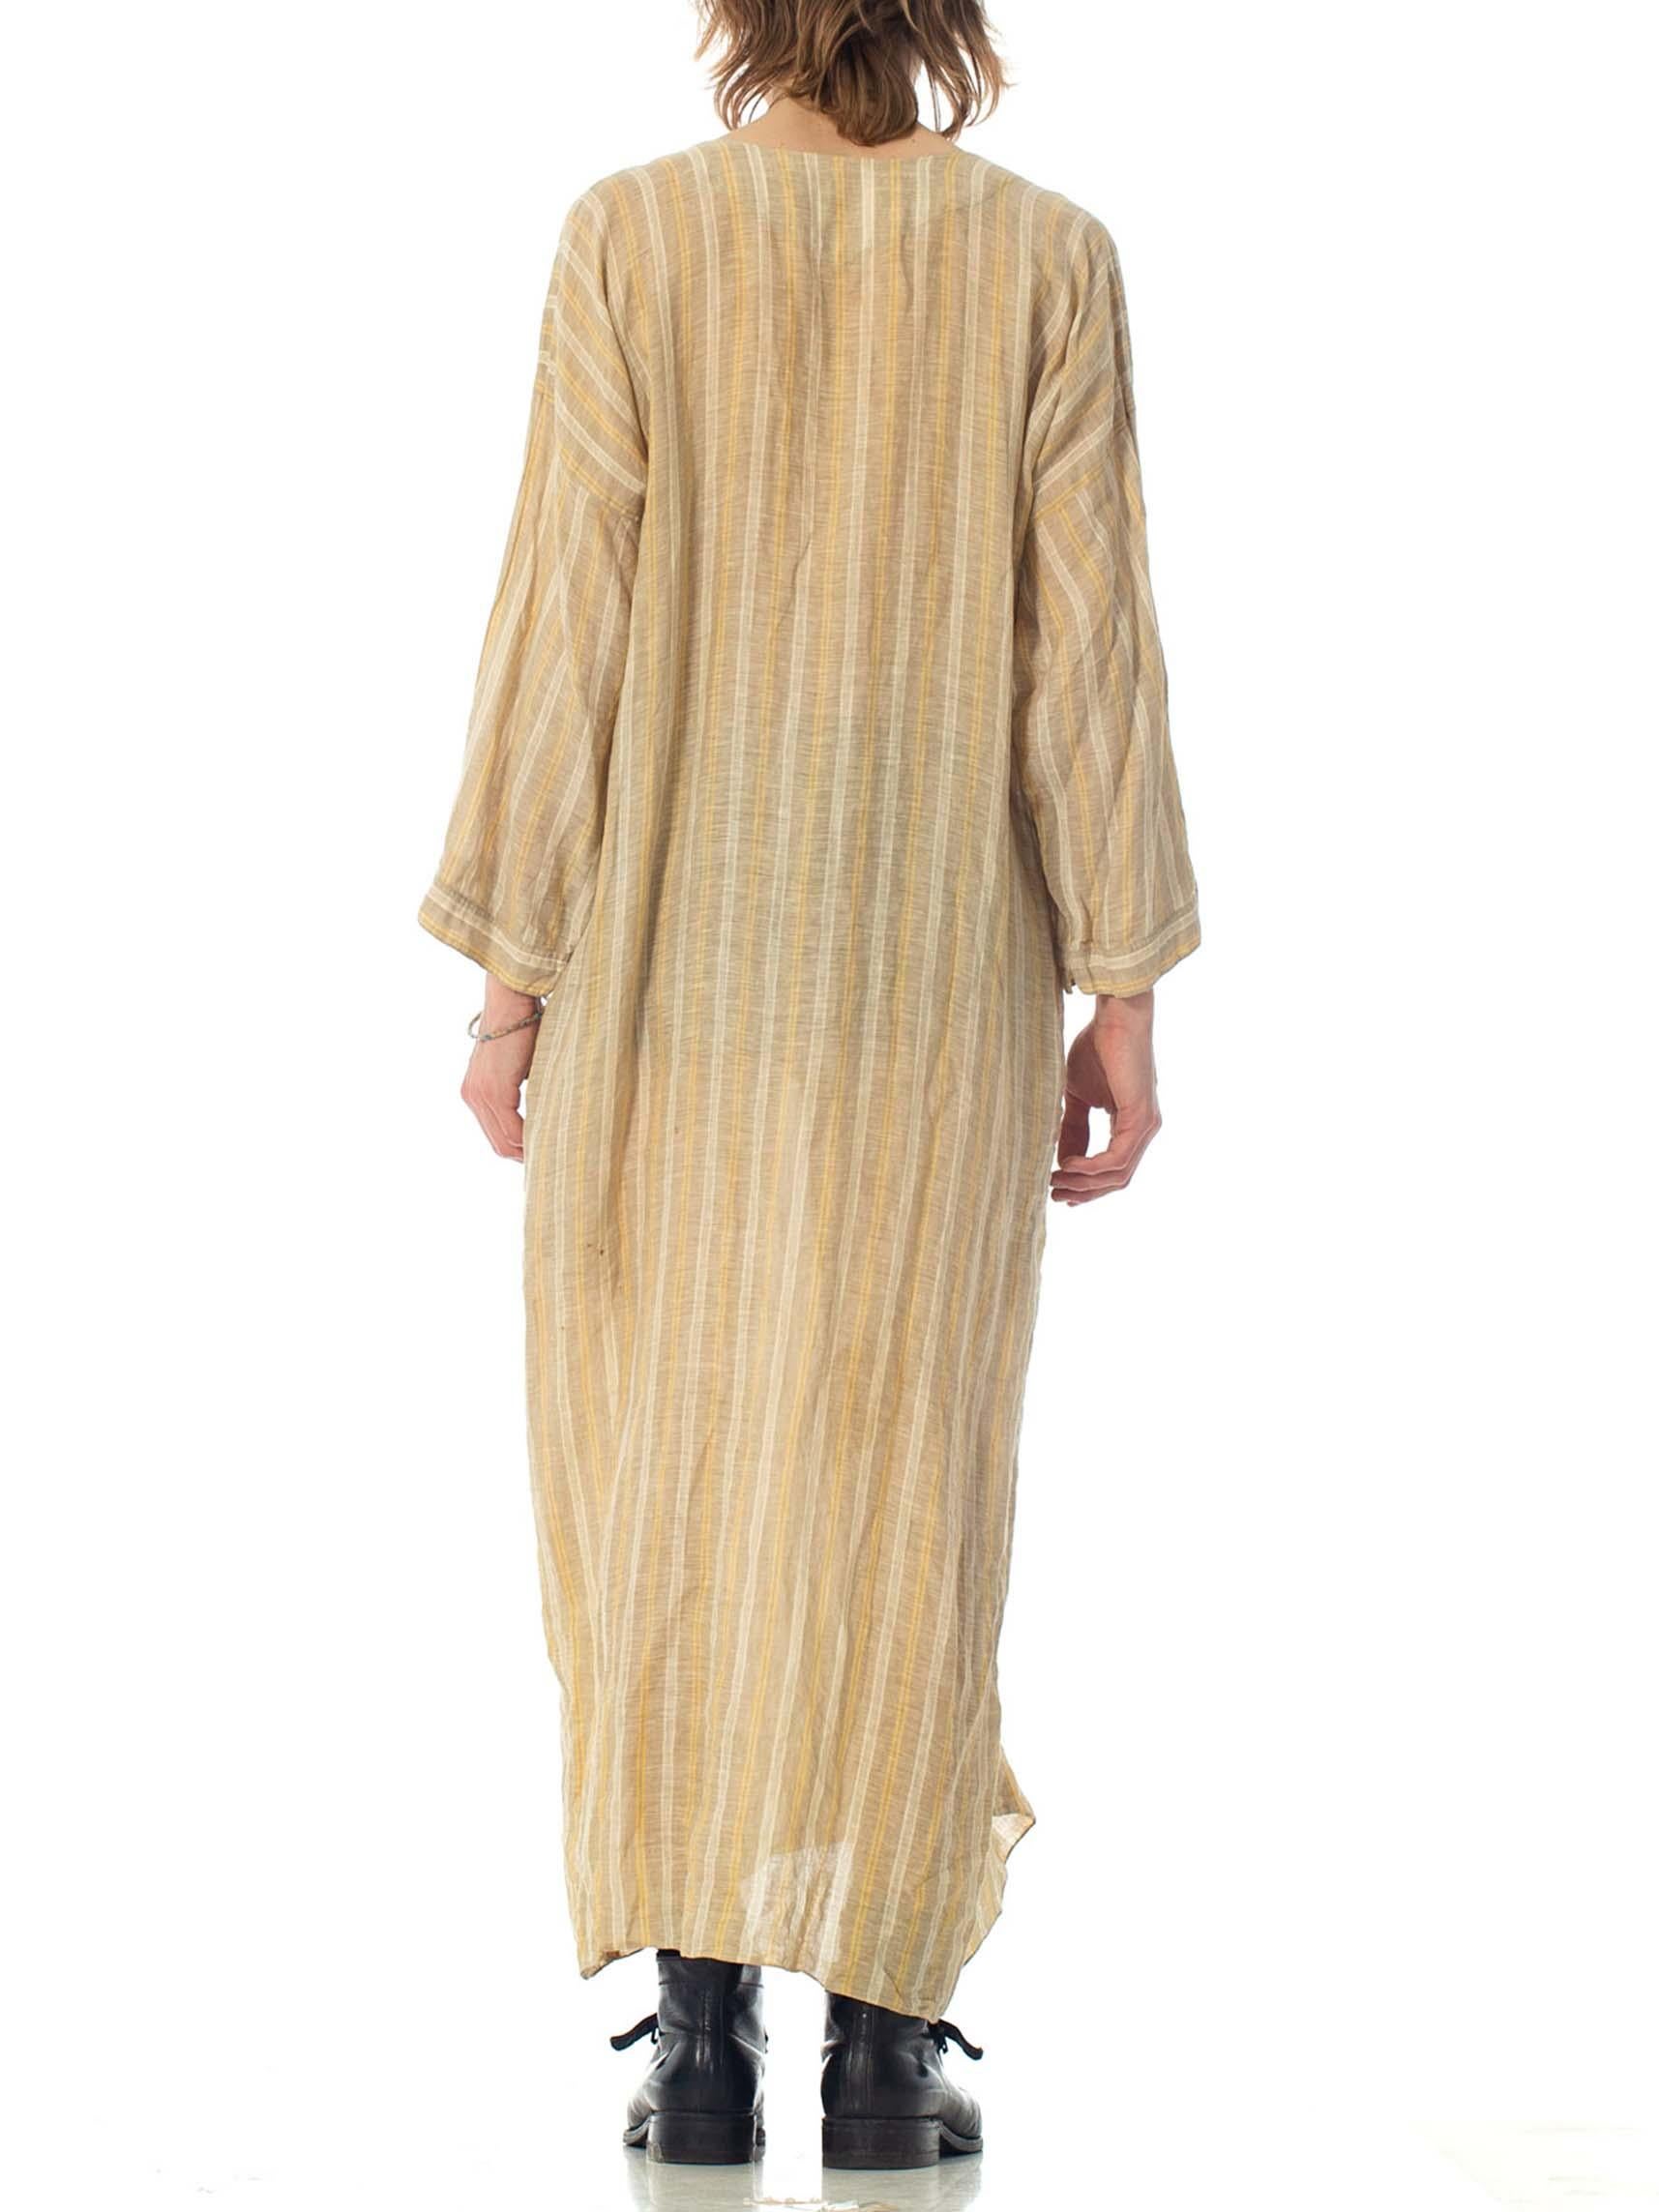 1970S ISSEY MIYAKE STYLE- Style Beige & White Cotton Blend Tunic Duster For Sale 6